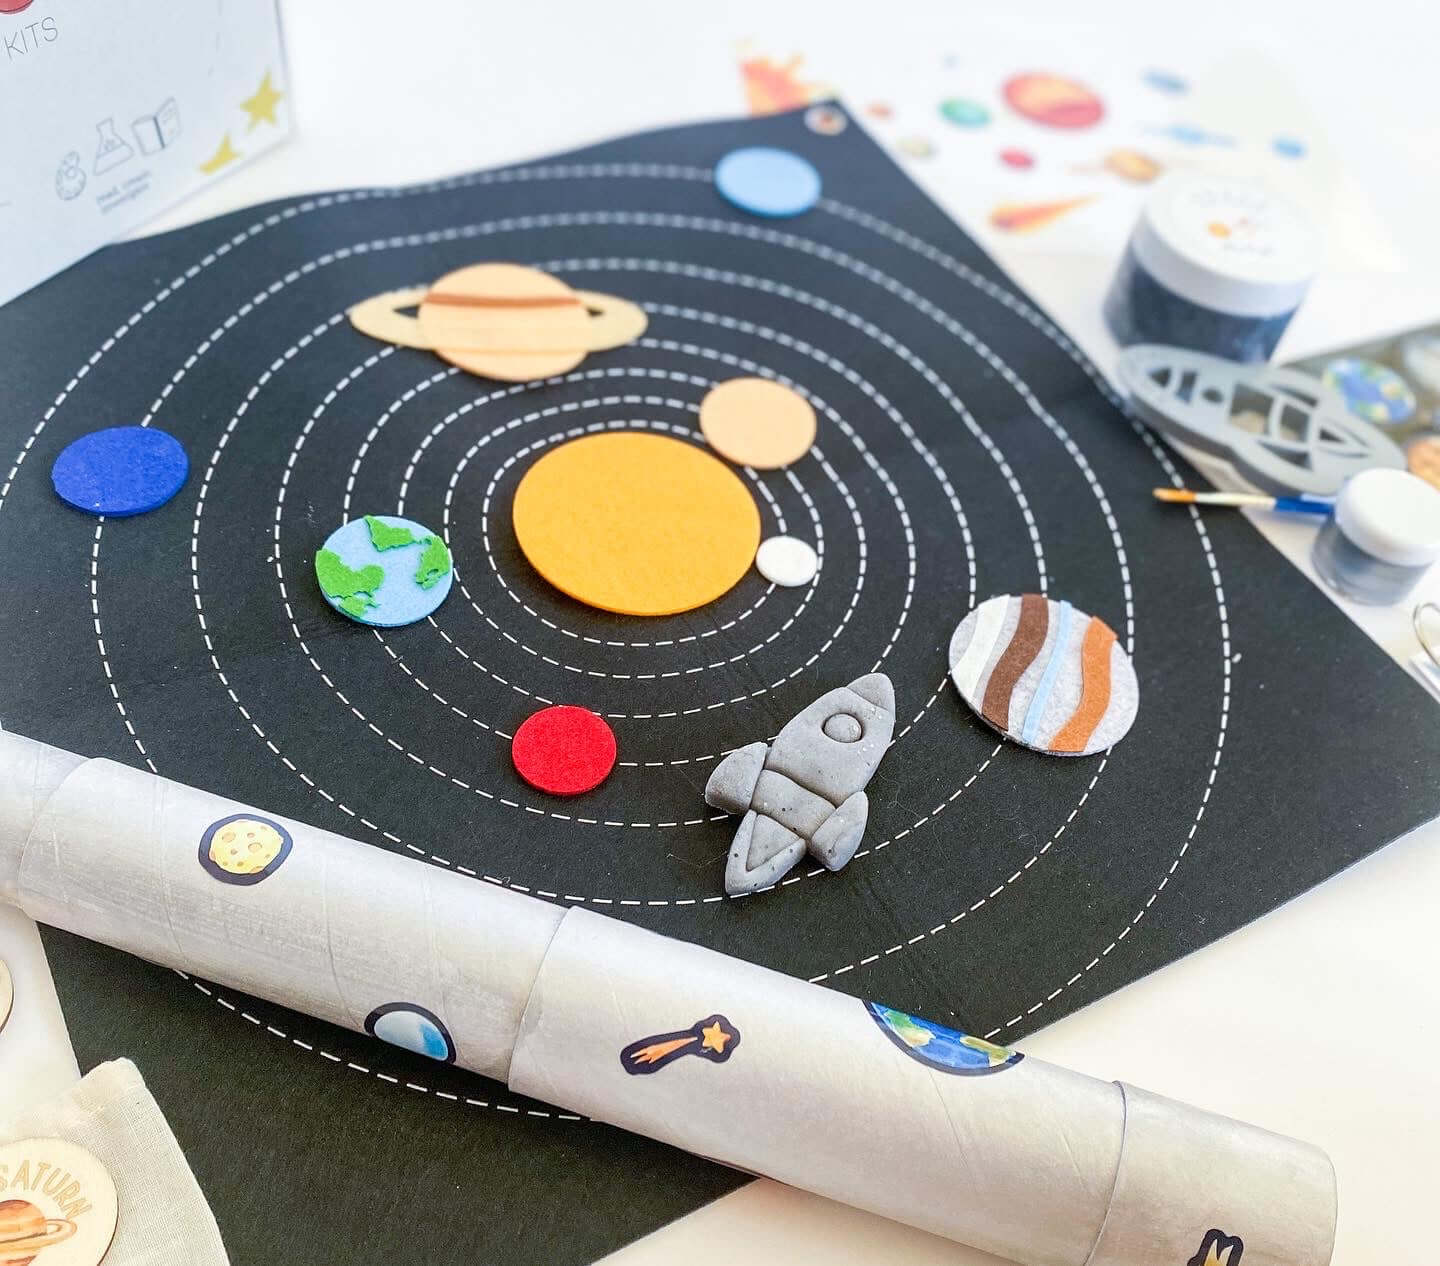 Space-themed play and learn kit for children with homemade playdough, rocket playdough cutter, and telescope activity. Includes wooden planet memory game, NASA name badge, and a box that transforms into a rocket backpack for hours of fun.